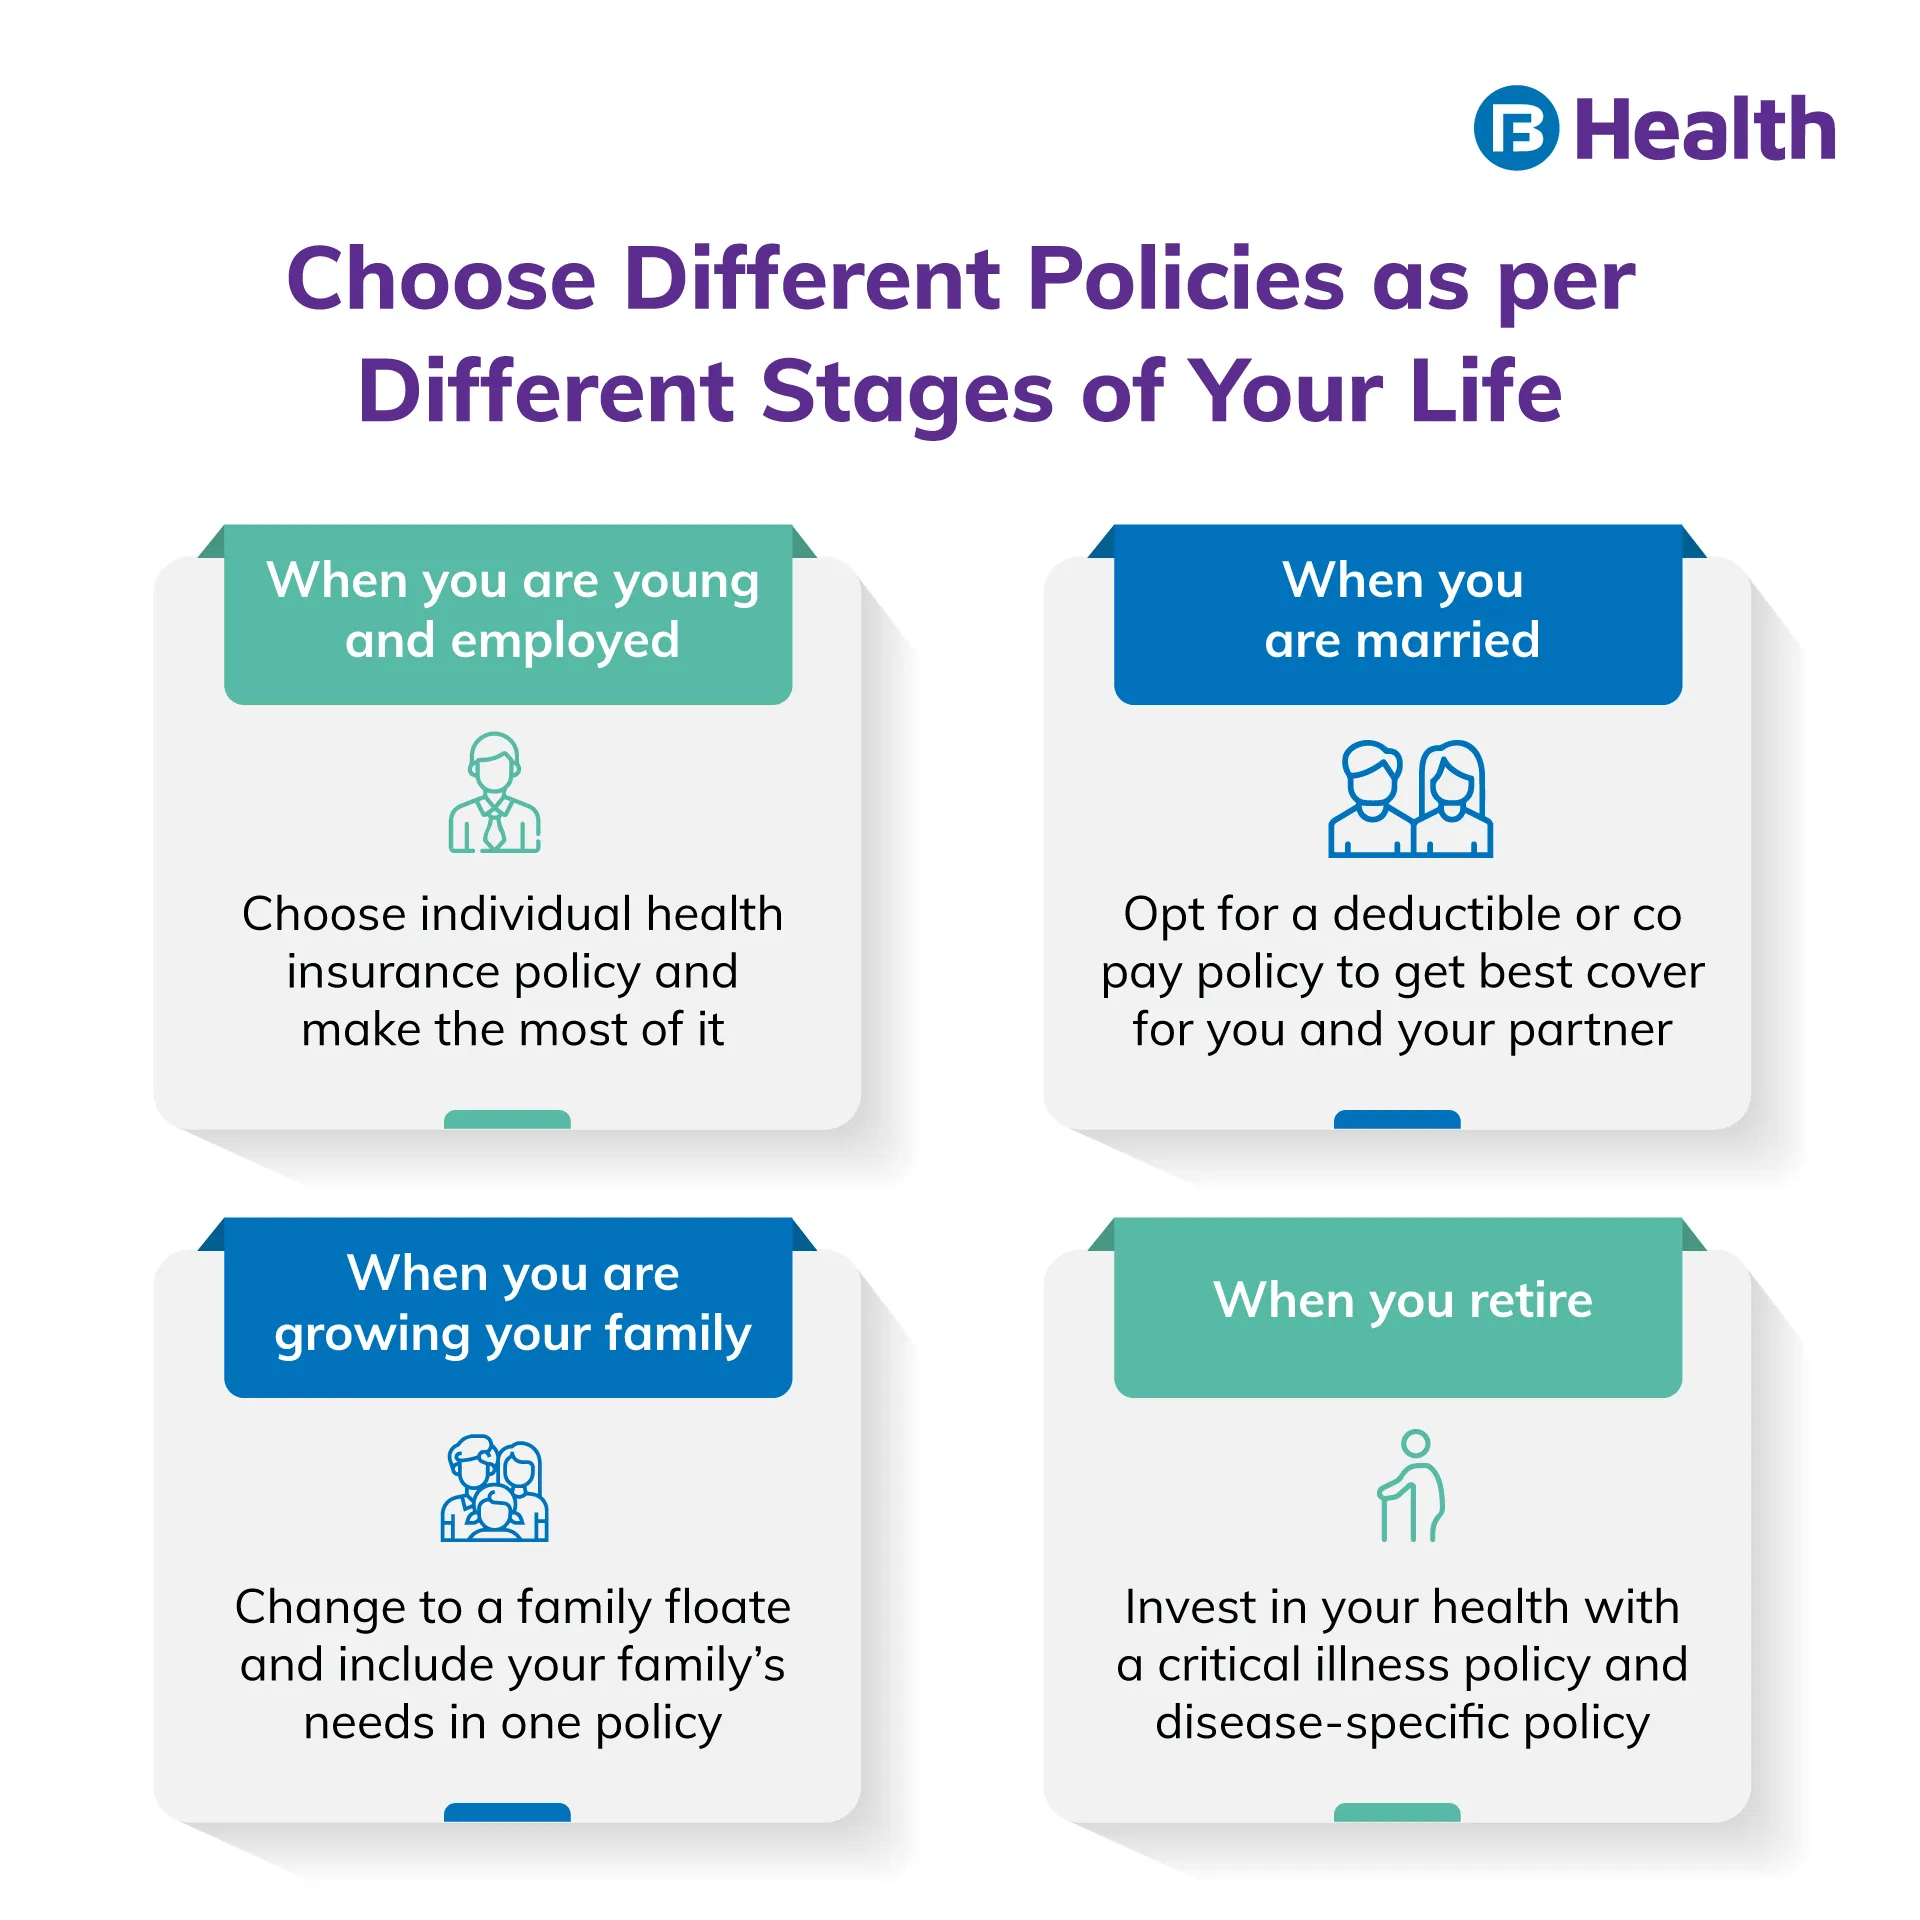 health insurance in different phases of life